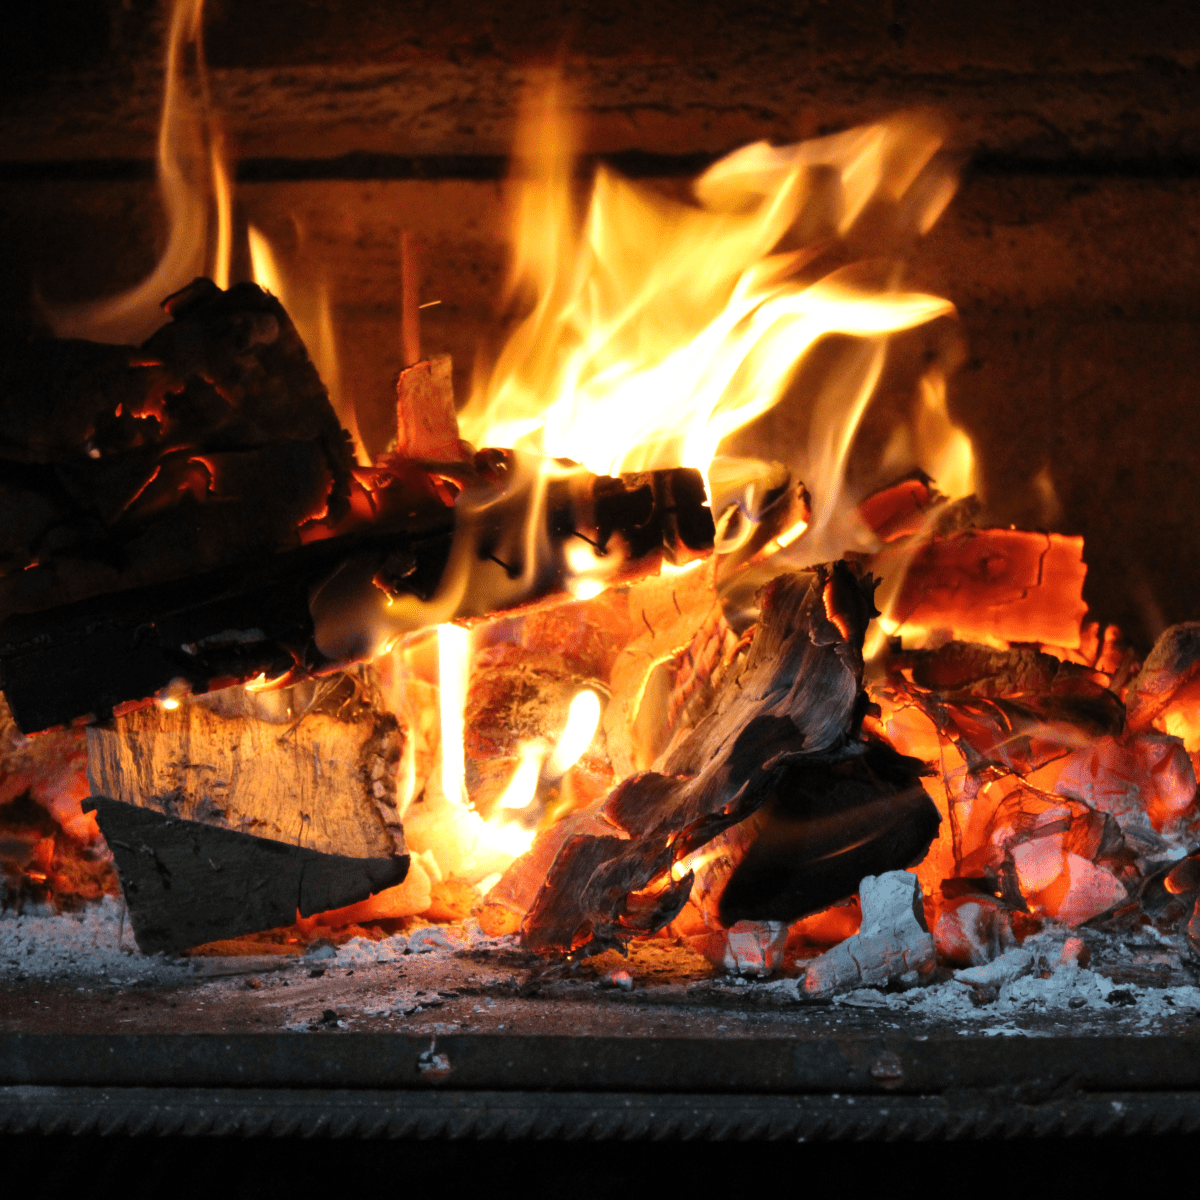 How to Make Gel Fuel for Your Ventless Fireplace: A DIY Guide